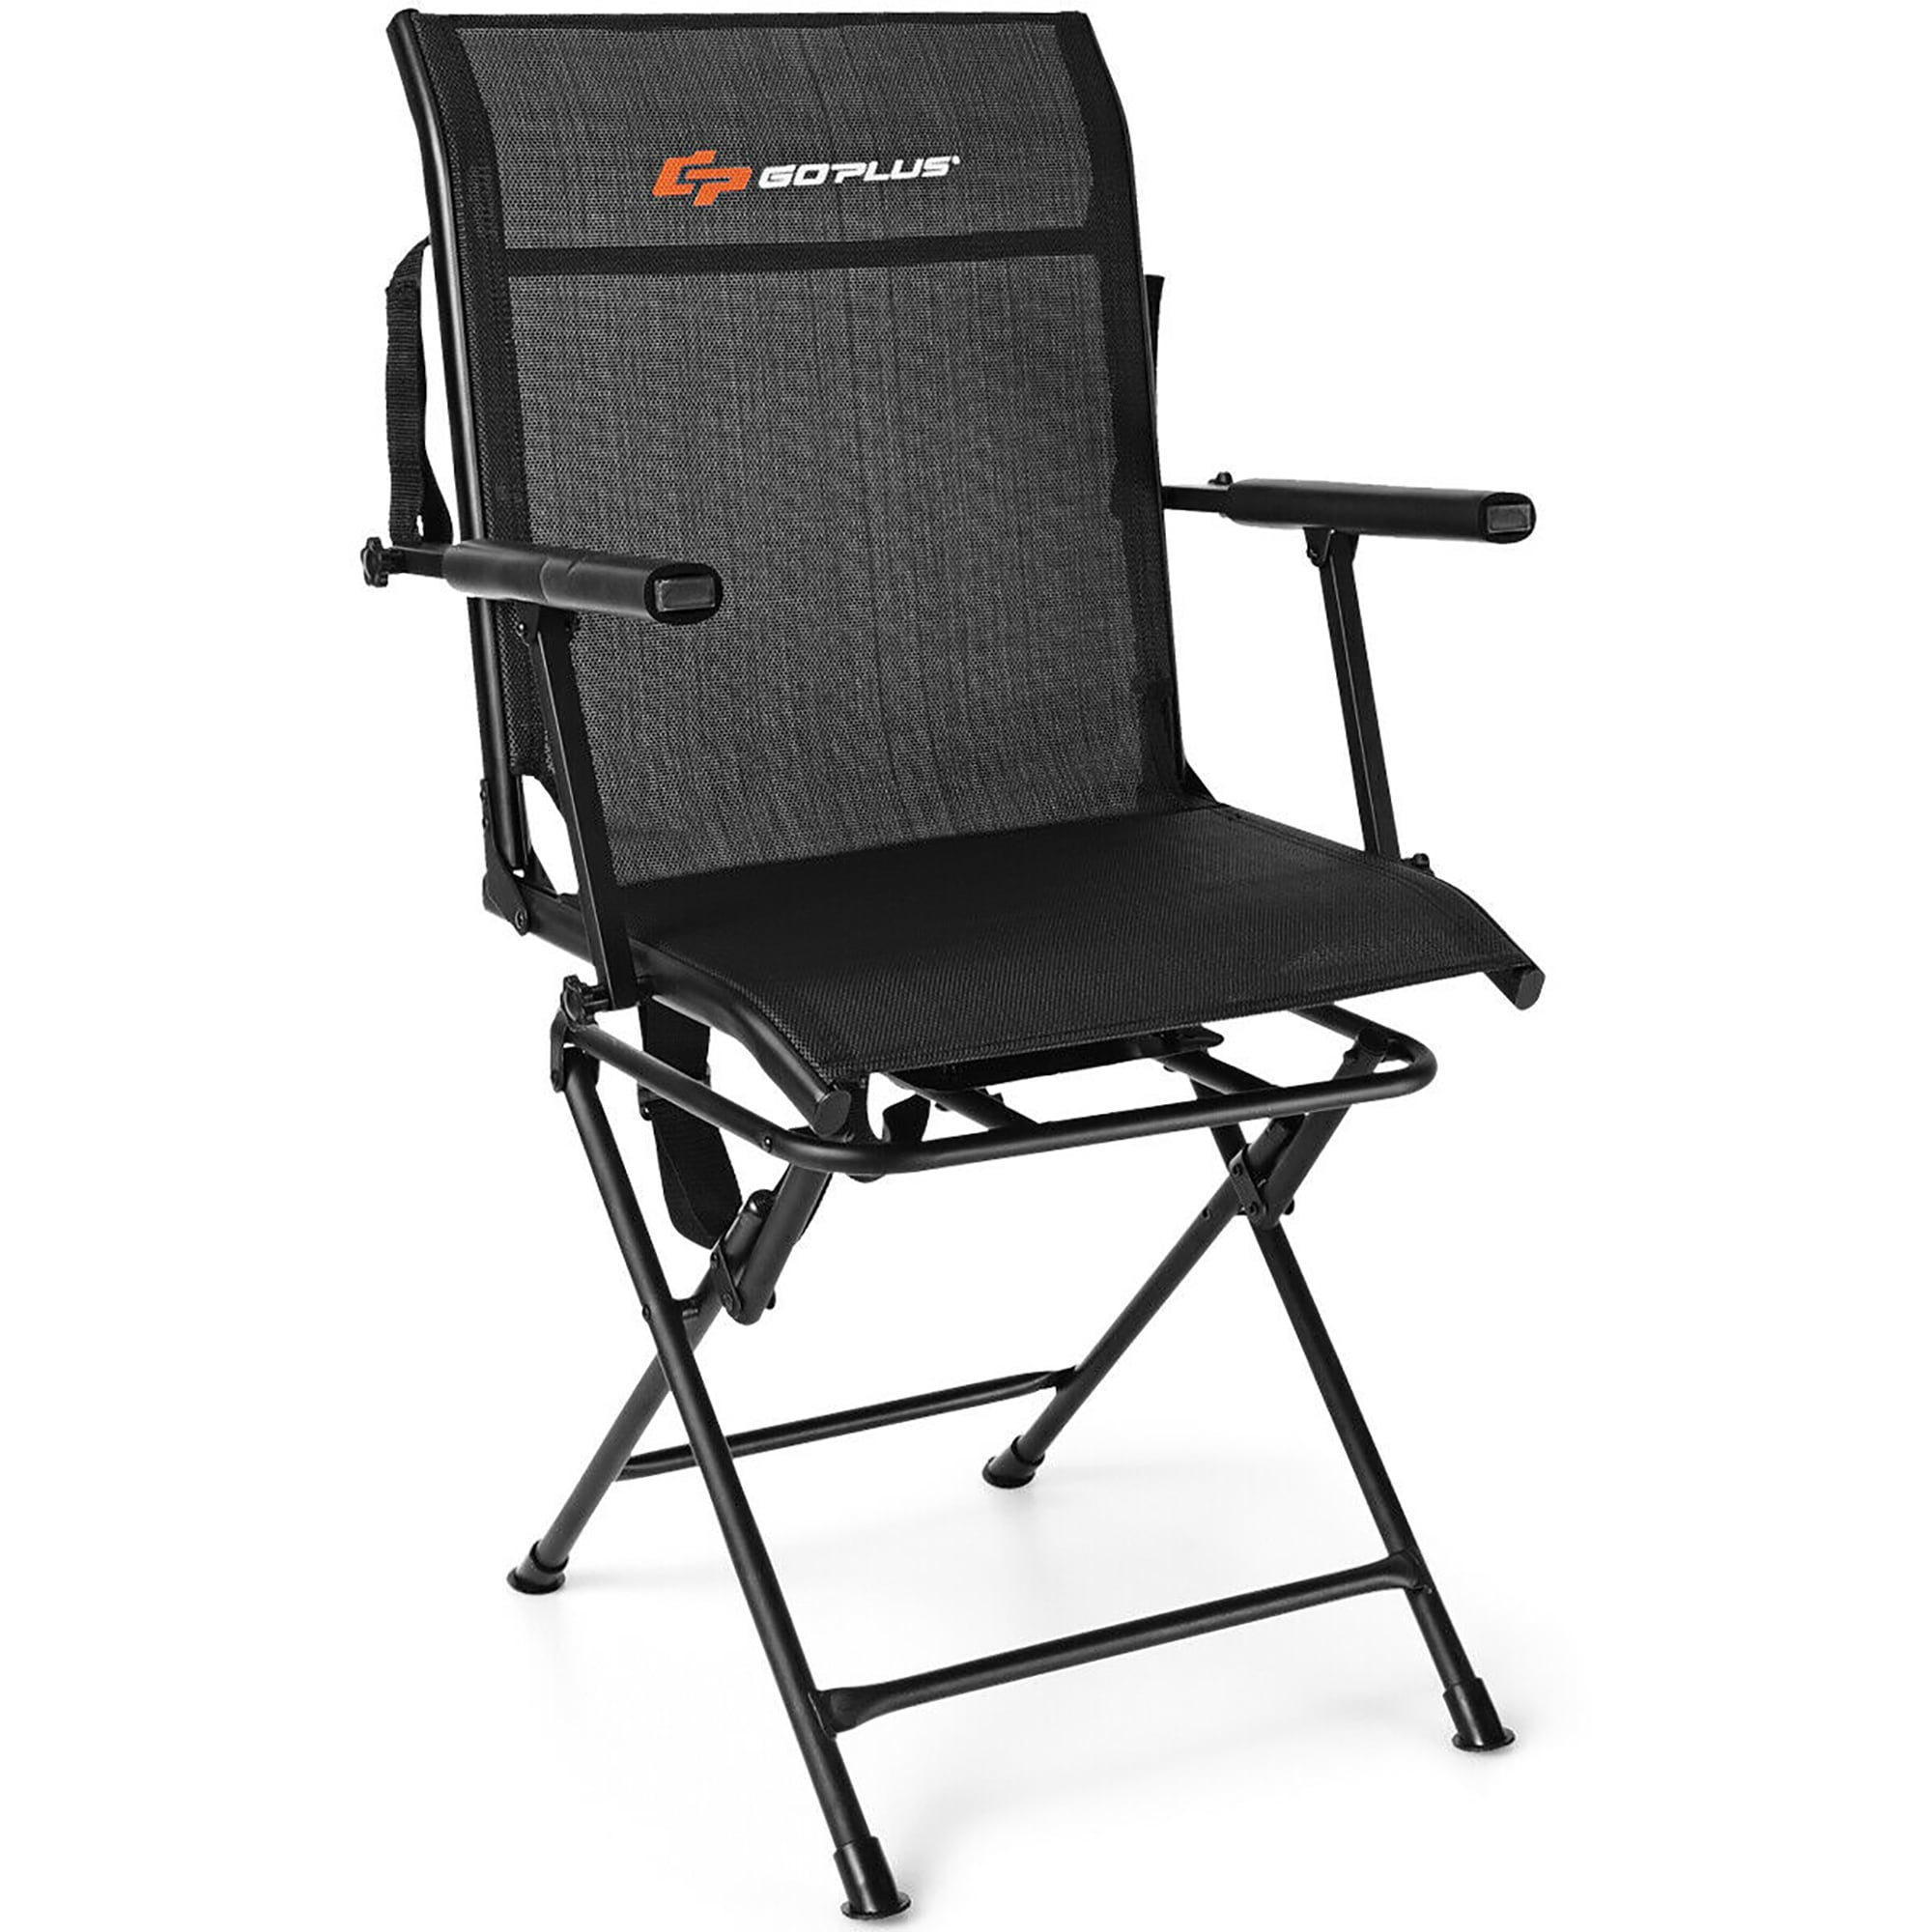 Details about   Goplus Folding 360° Silent Swivel Hunting Chair Blind Chair All-weather Outdoor 